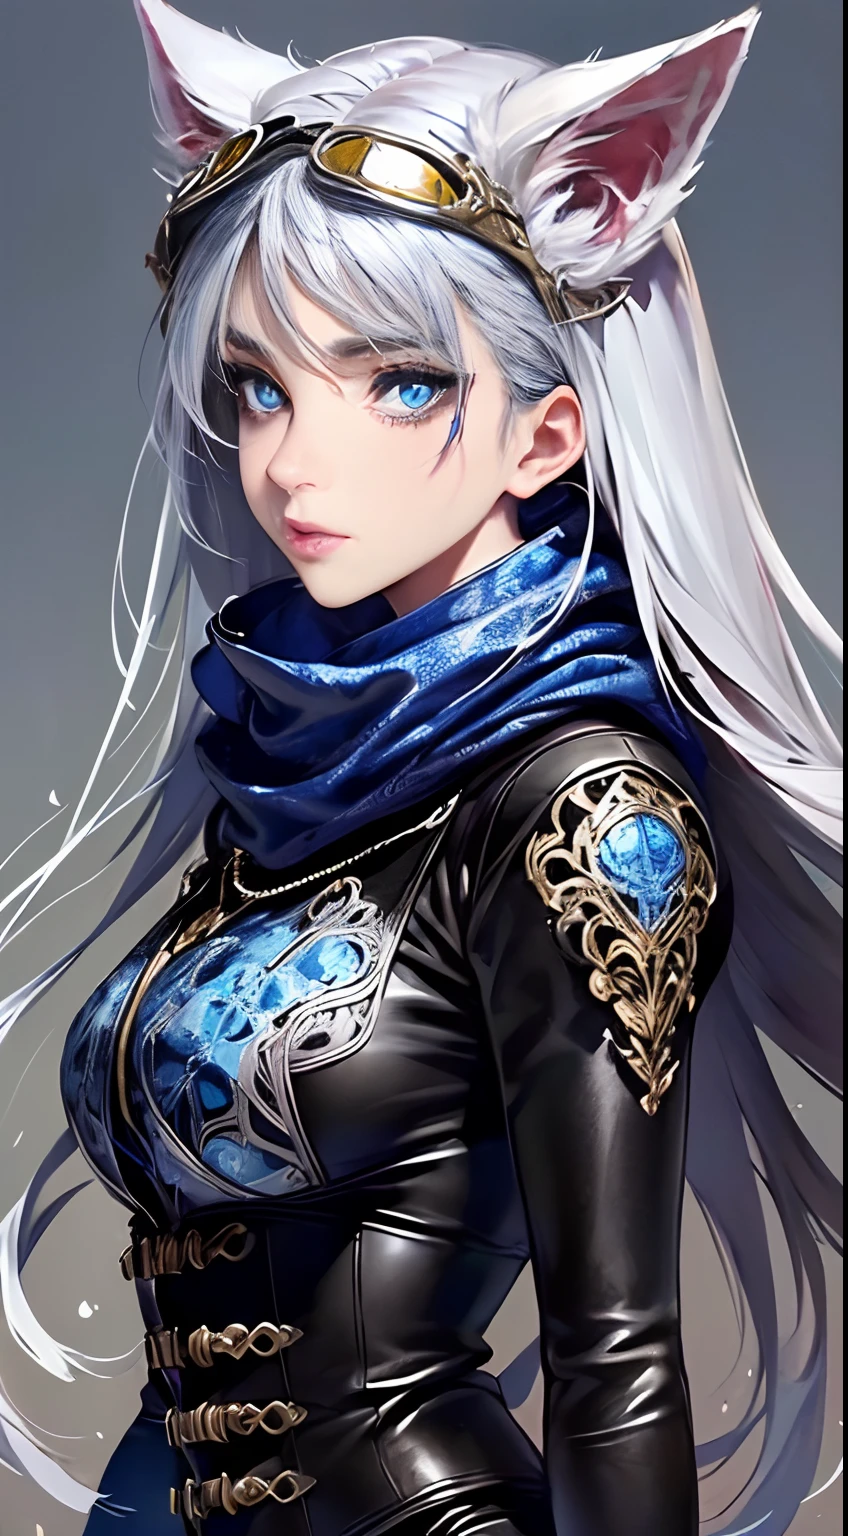 (Top resolution, Distinct_image) Best Quality, Women's masterpieces, Highly detailed, 1womanl，solo person，Half realistic, (Systemic), Silver hair, bangs, 18 years old, young, Silver Accessories,Short Grey Silver Lace Skirt, (((Perfect face:1))), Sharp face, (bright blue almond eyes), (standing painting), (Exquisite facial features, Exquisite facial features), adolable, ((Silver bodysuit with intricate design)), Silvery little cat ears, (((Wearing leather goggles with blue lenses))), ((Black scarf with blue floral pattern and intricate design)), Dark large bamboo forest on background, abandoned houses,